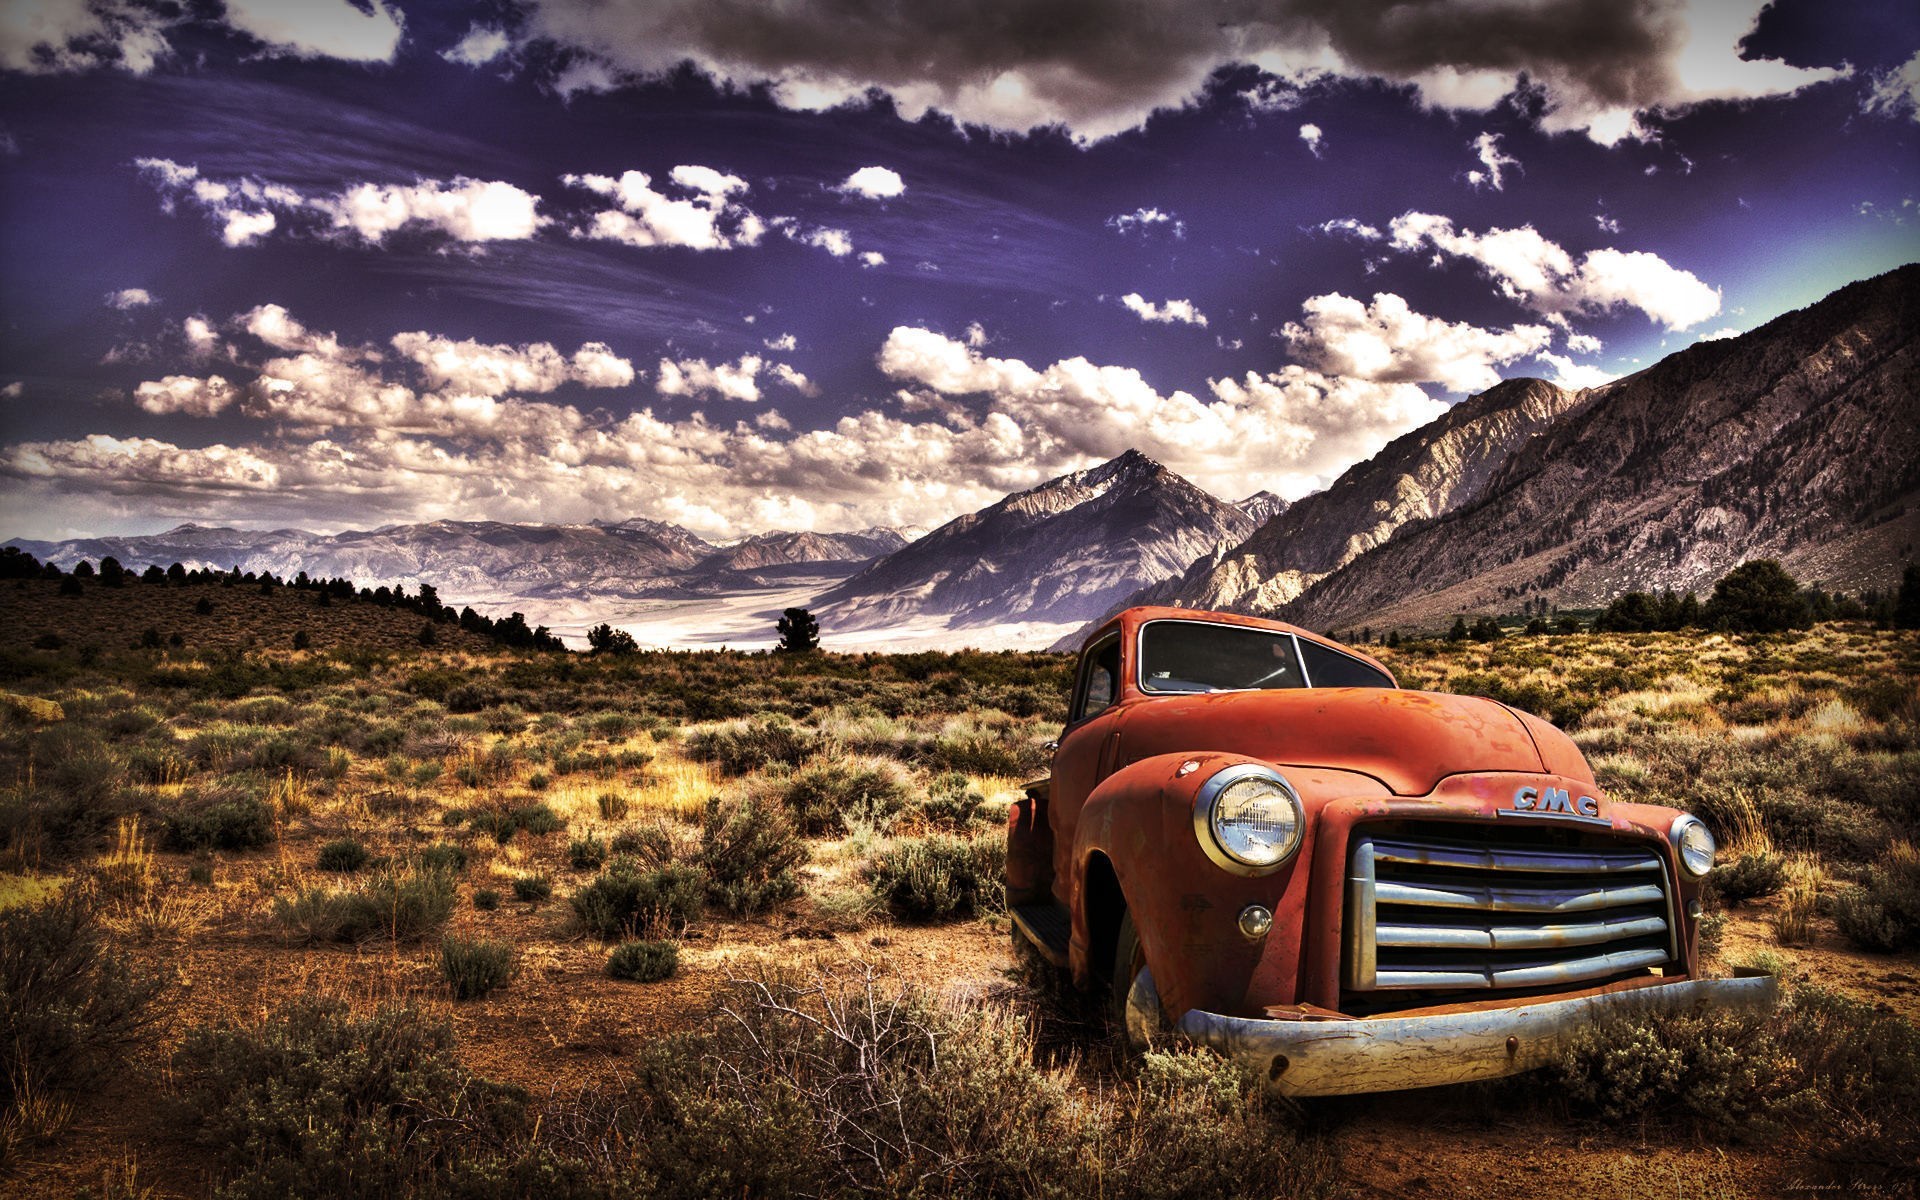 General 1920x1200 landscape nature HDR mountains sky car vehicle clouds old car shrubs GMC